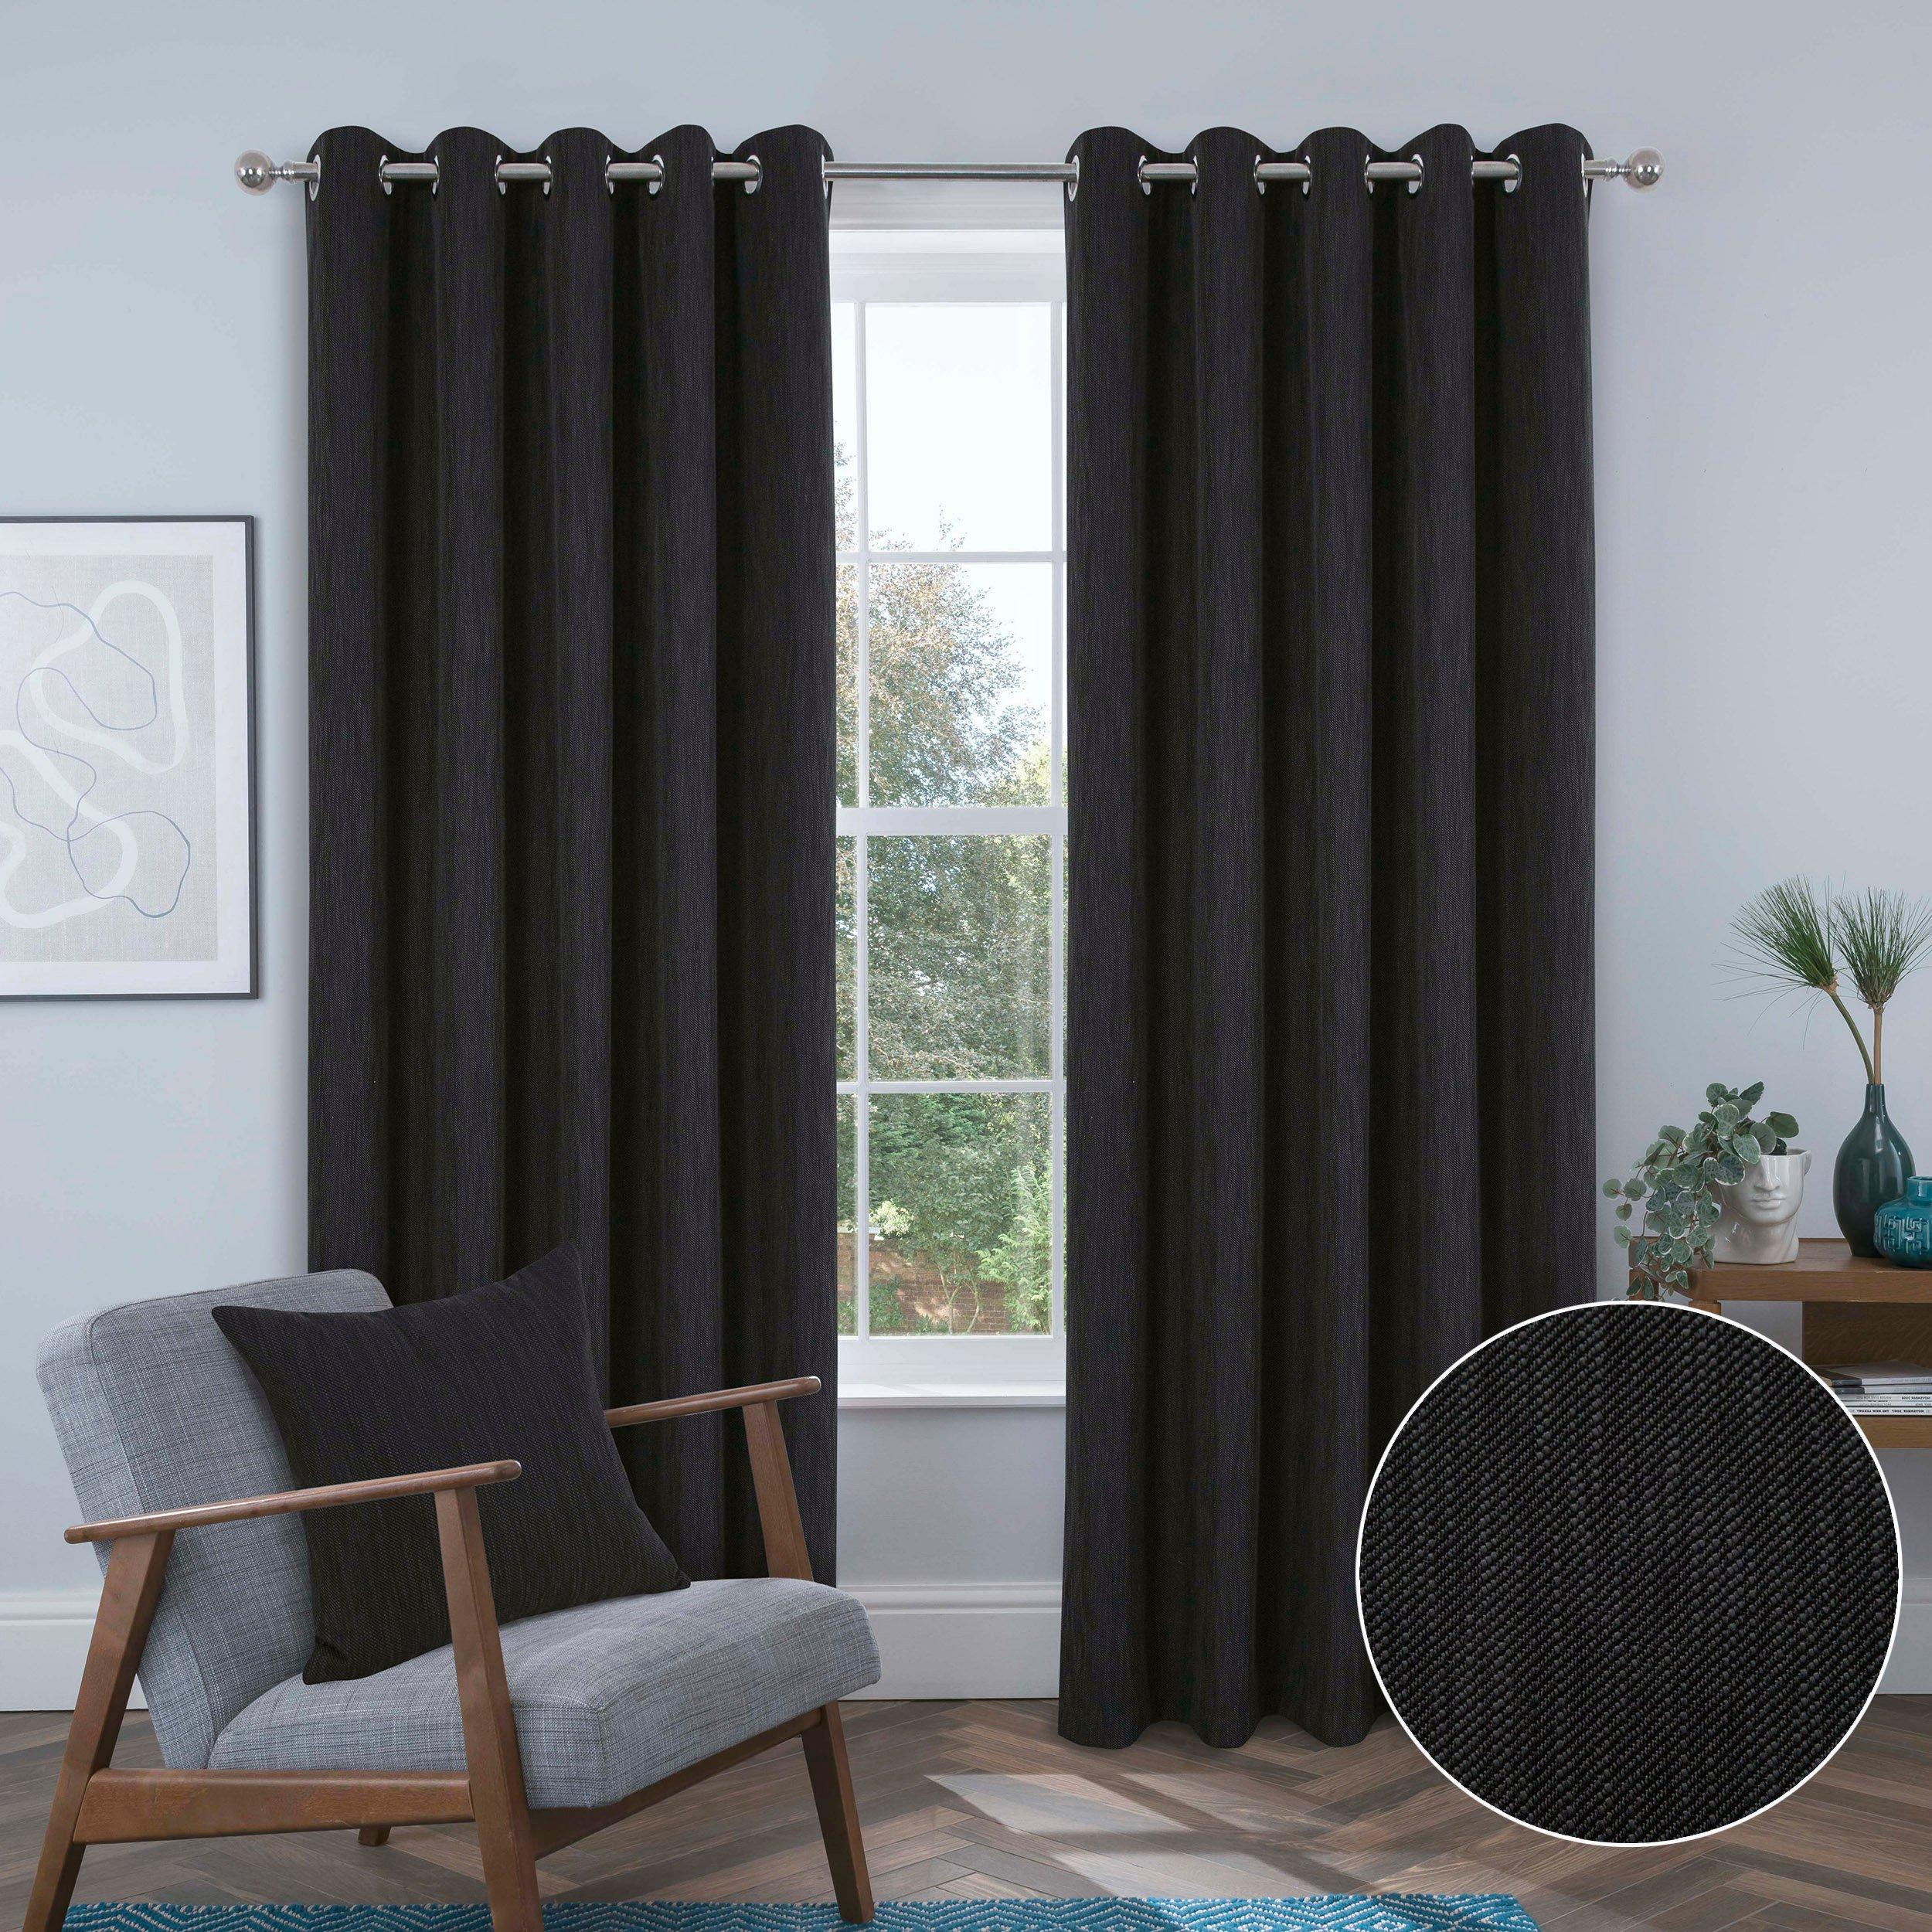 Rossi textured Thermal Blackout Lined Eyelet curtains pair